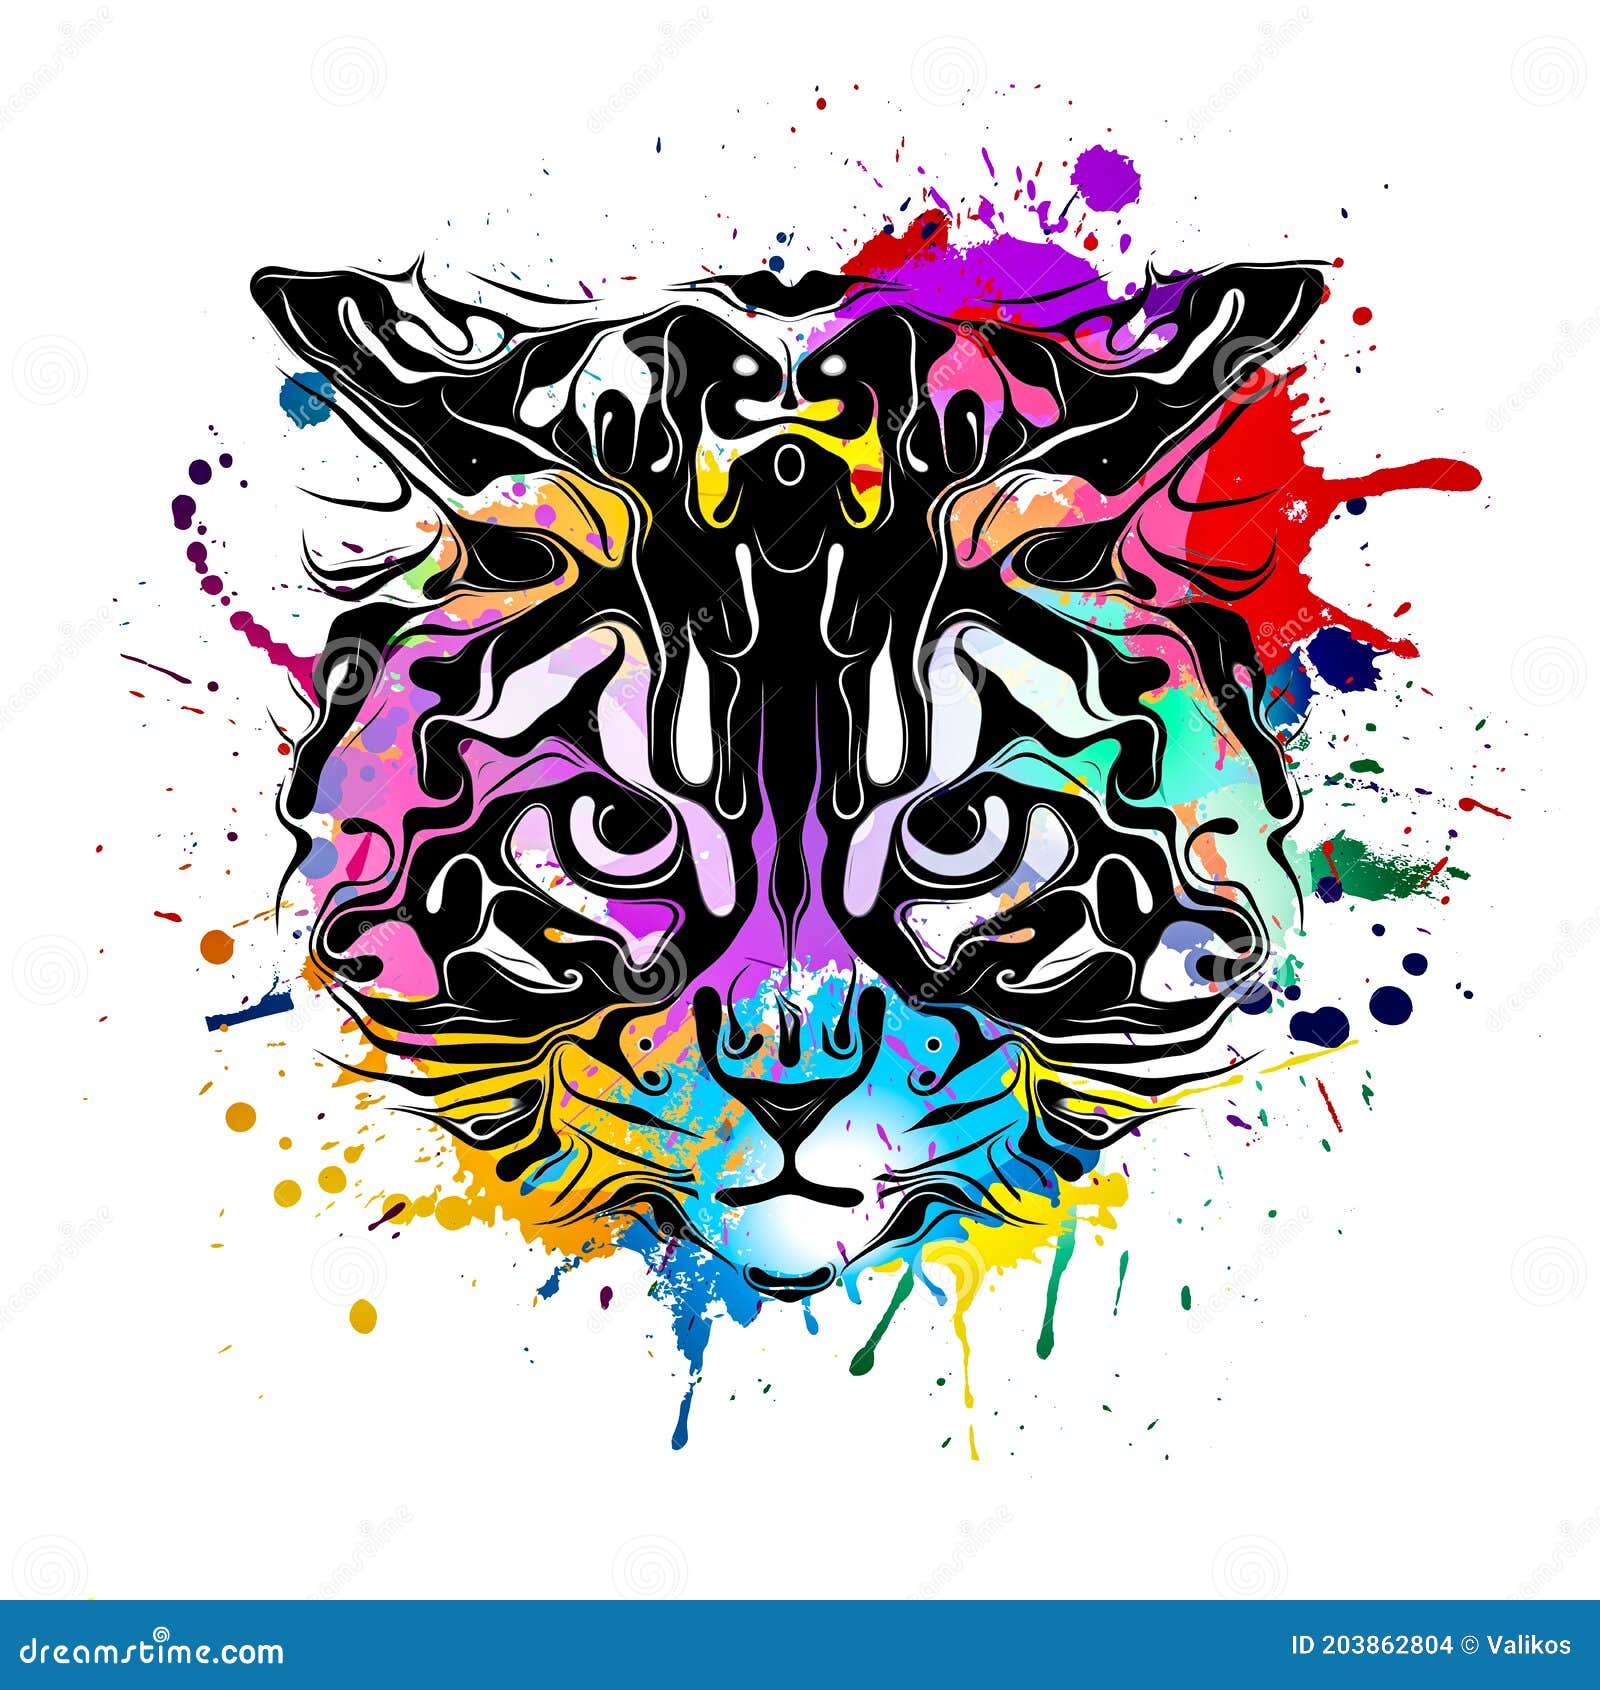 Abstract, Animal, Art, Artistic, Artwork, Backgrou Illustration on White  Background with Colorful Creative Elements Design Concept Stock  Illustration - Illustration of design, element: 203862804